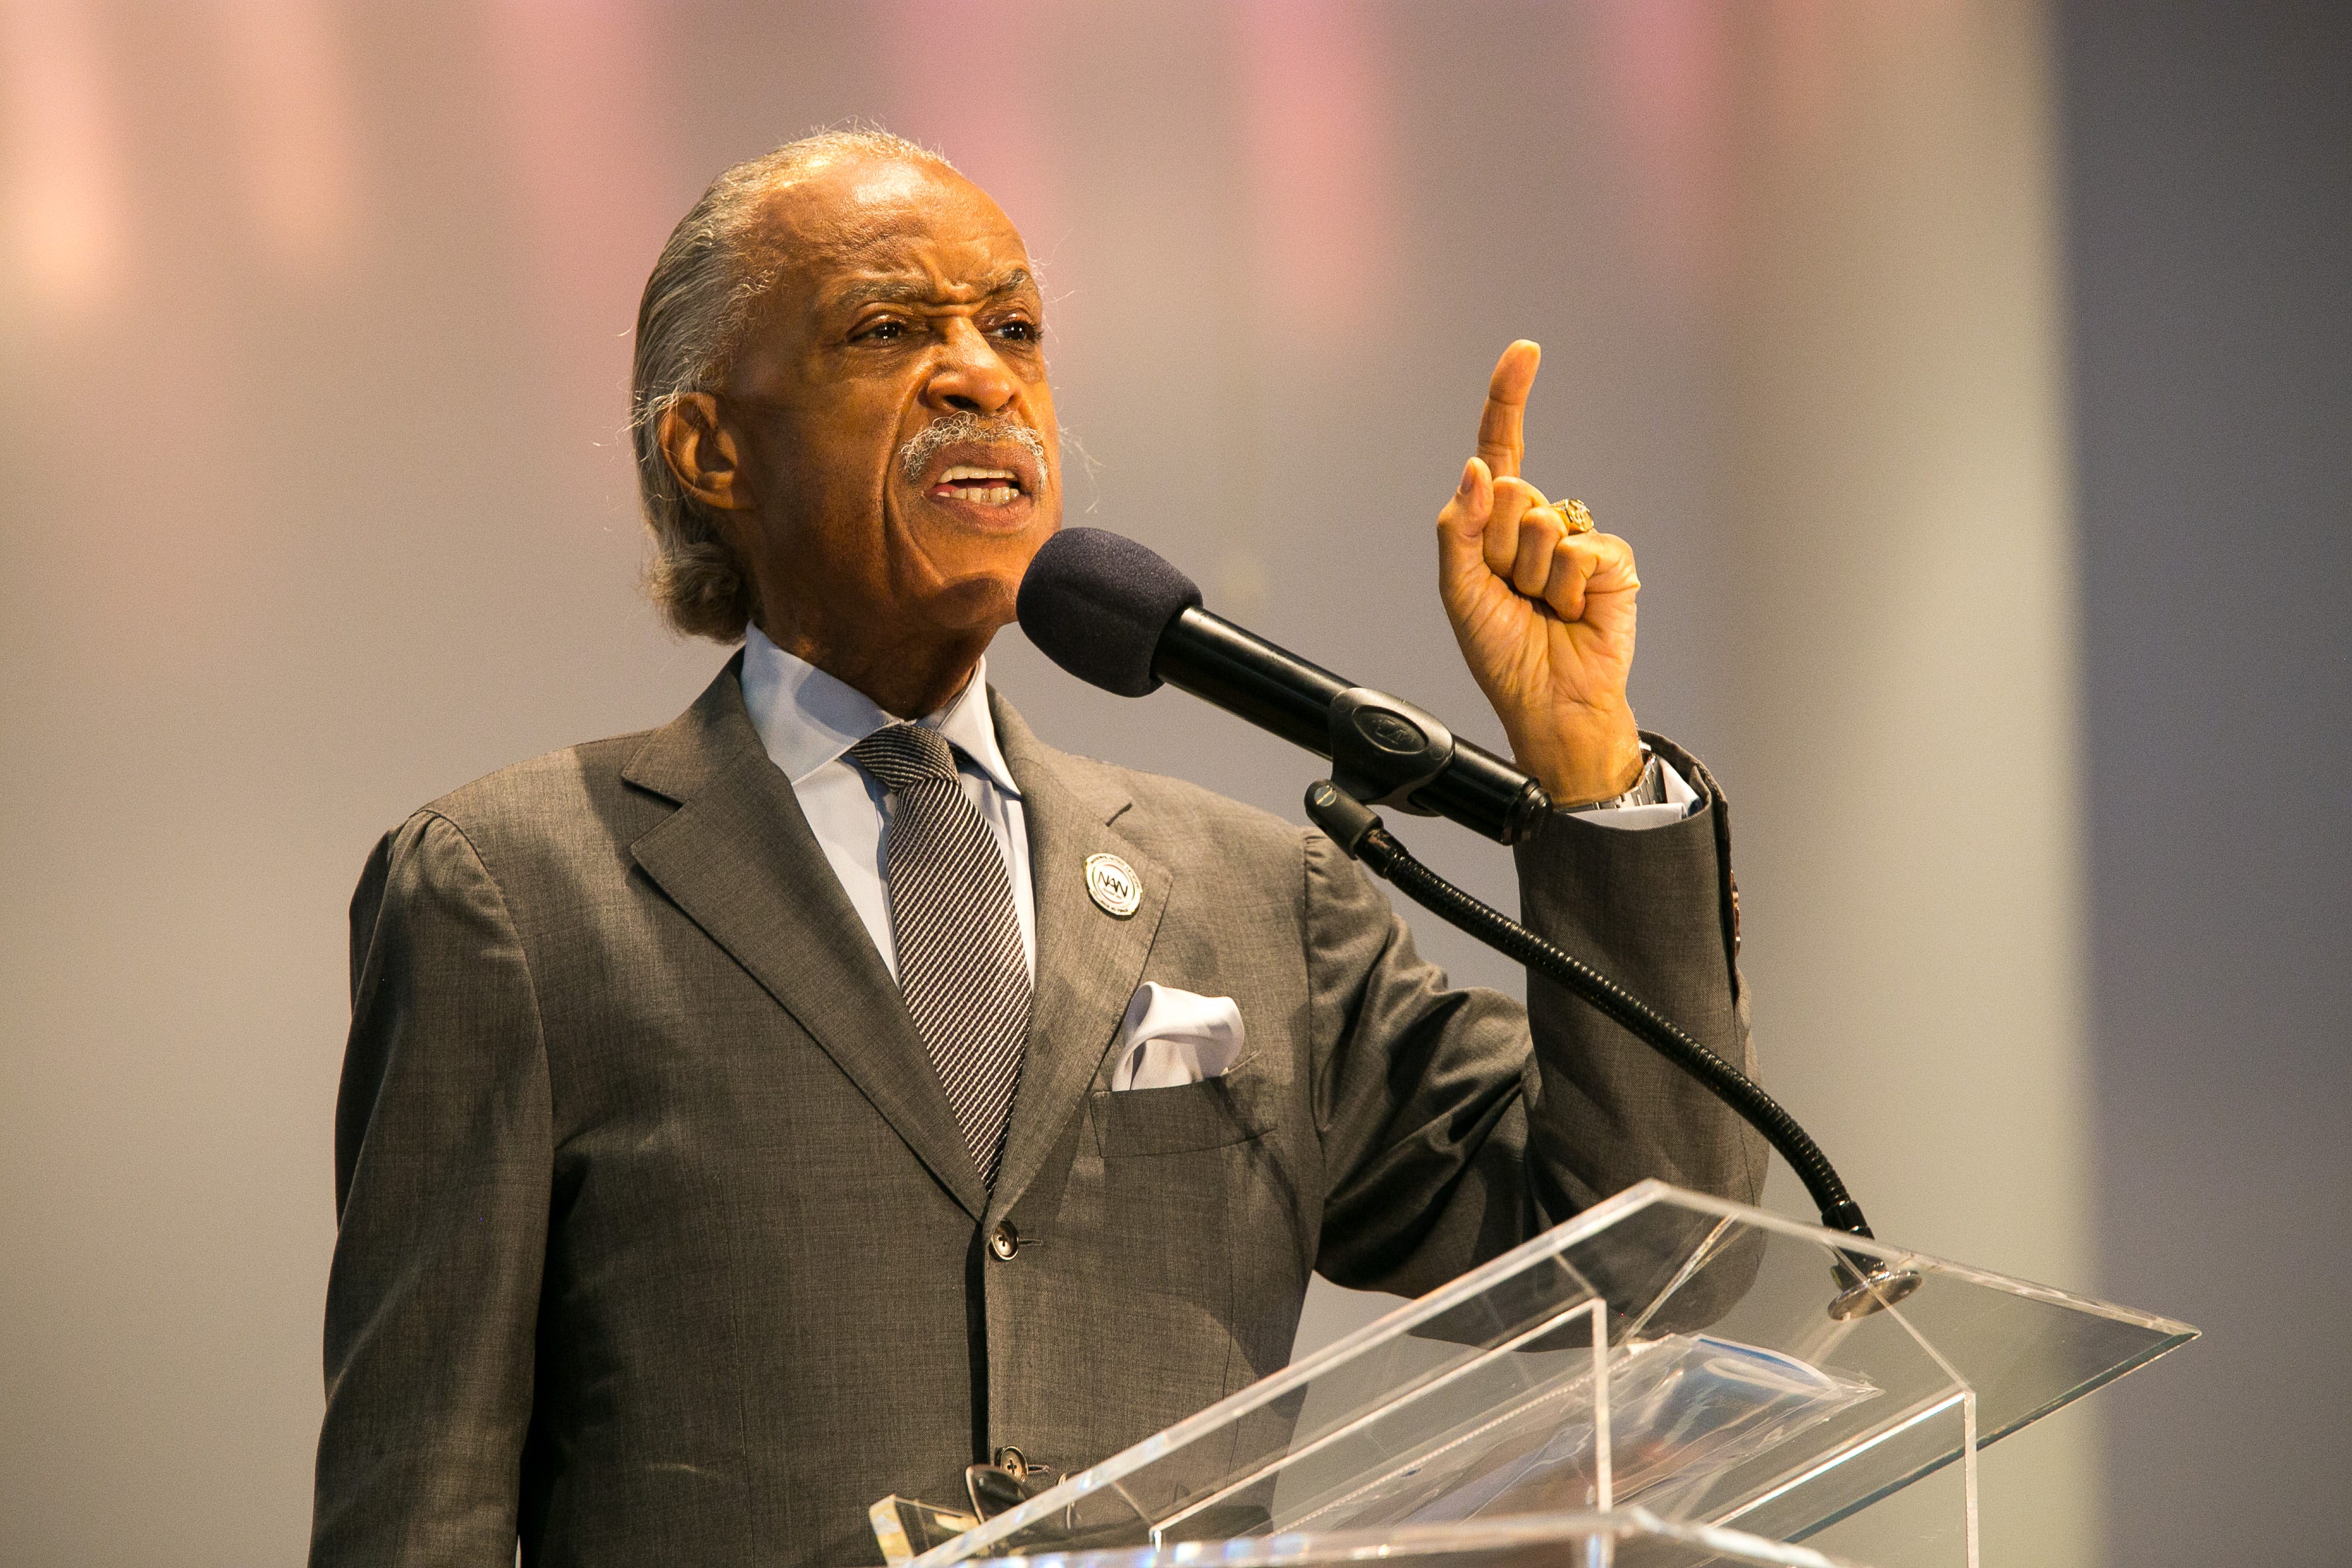 'I'd be honored': Rev. Al Sharpton to give eulogy at Tyre Nichols' funeral in Memphis